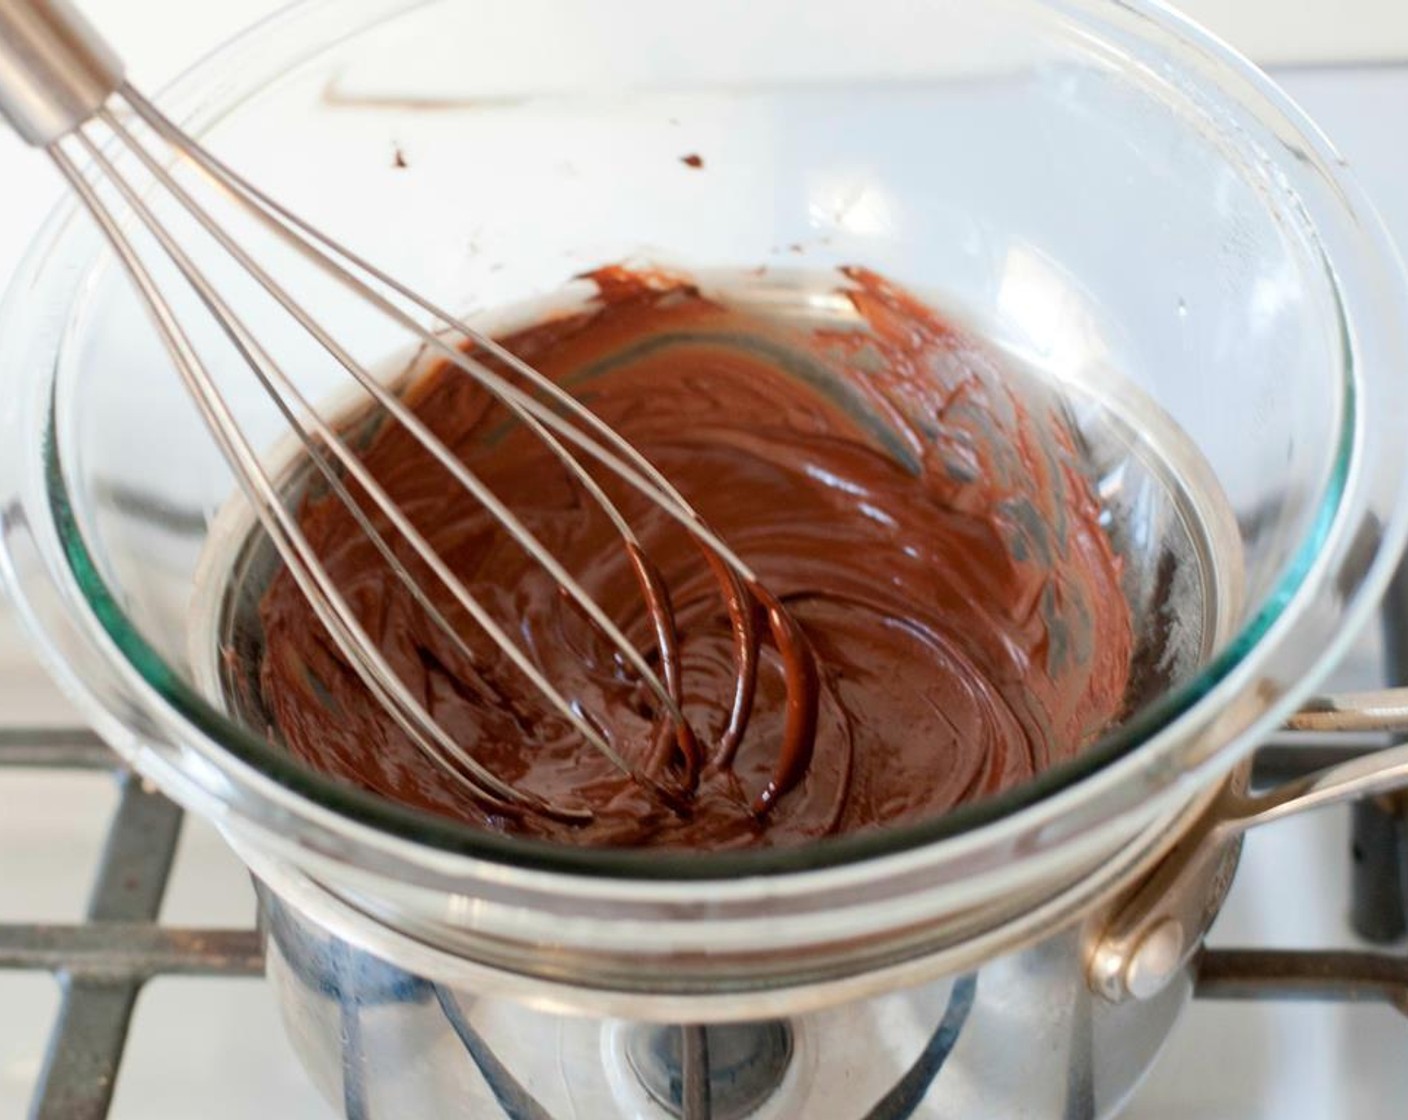 step 2 Place a small stovetop-safe bowl inside the pot and turn the heat down to low, just enough to keep the water boiling. Add the Dark Chocolate Chunks (1/4 cup) and whisk intermittently, erasing any clumps and ensuring it doesn't burn.